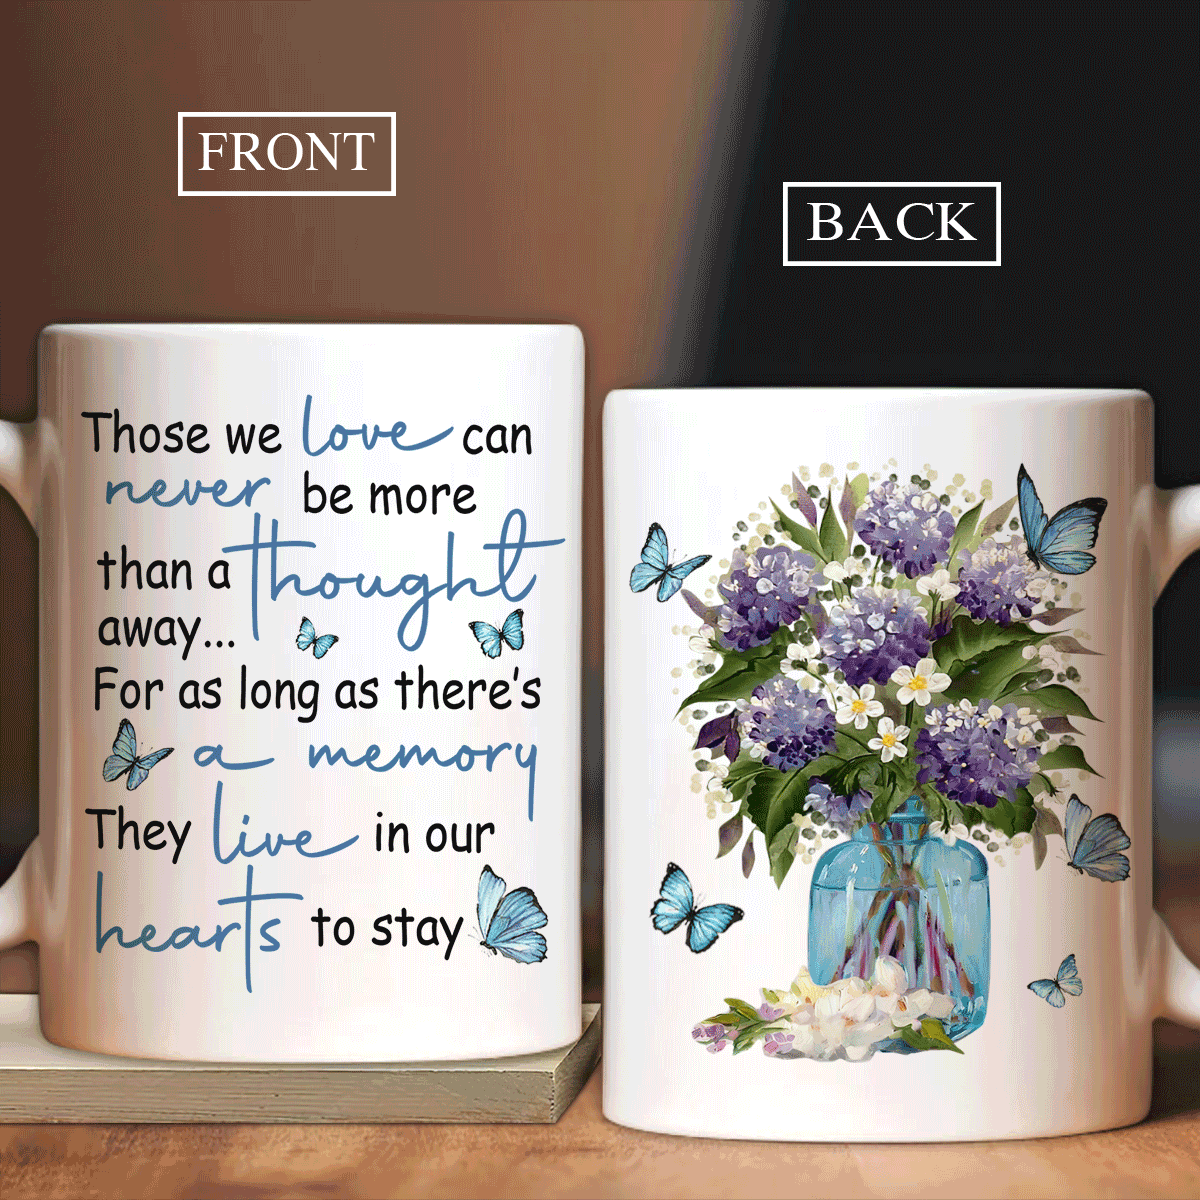 Memorial White Mug - Vintage flower vase, Flower painting - Gift for members family - Those we love can never be more than a thought away - Heaven White Mug.